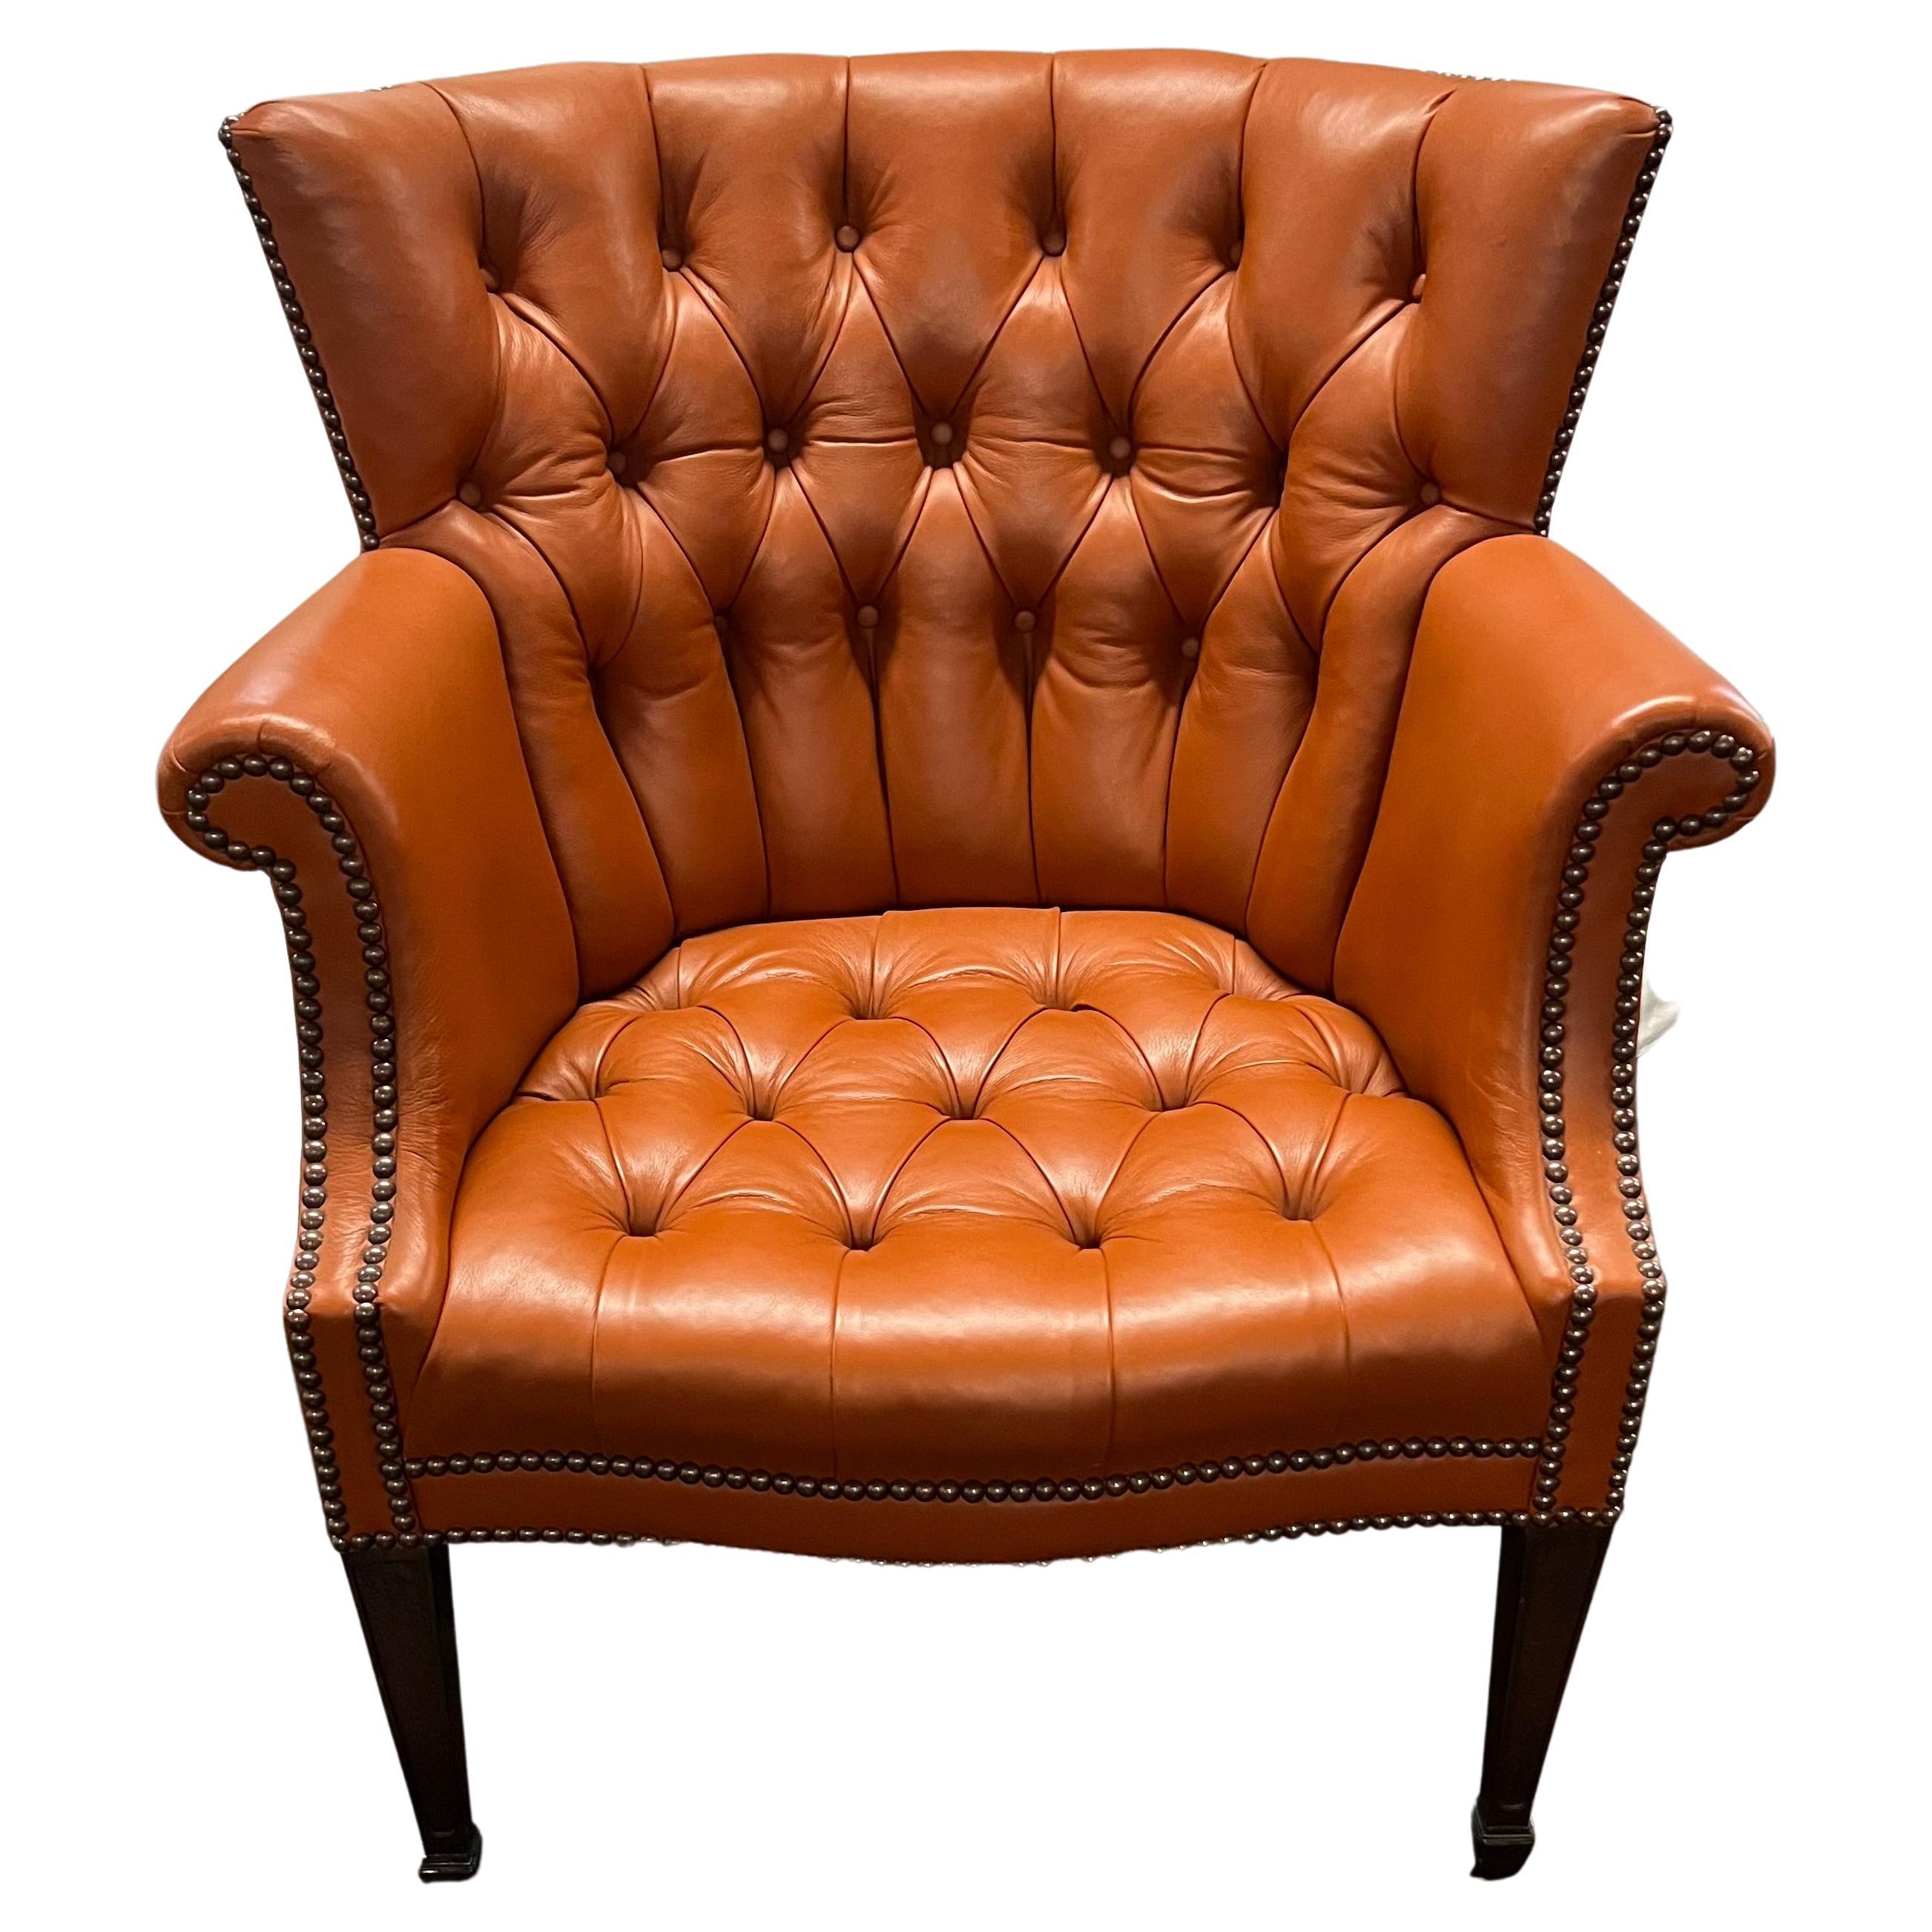 Baker Wing Back Chair in Holly Hunt Spice Colored Leather with Nailhead Trim